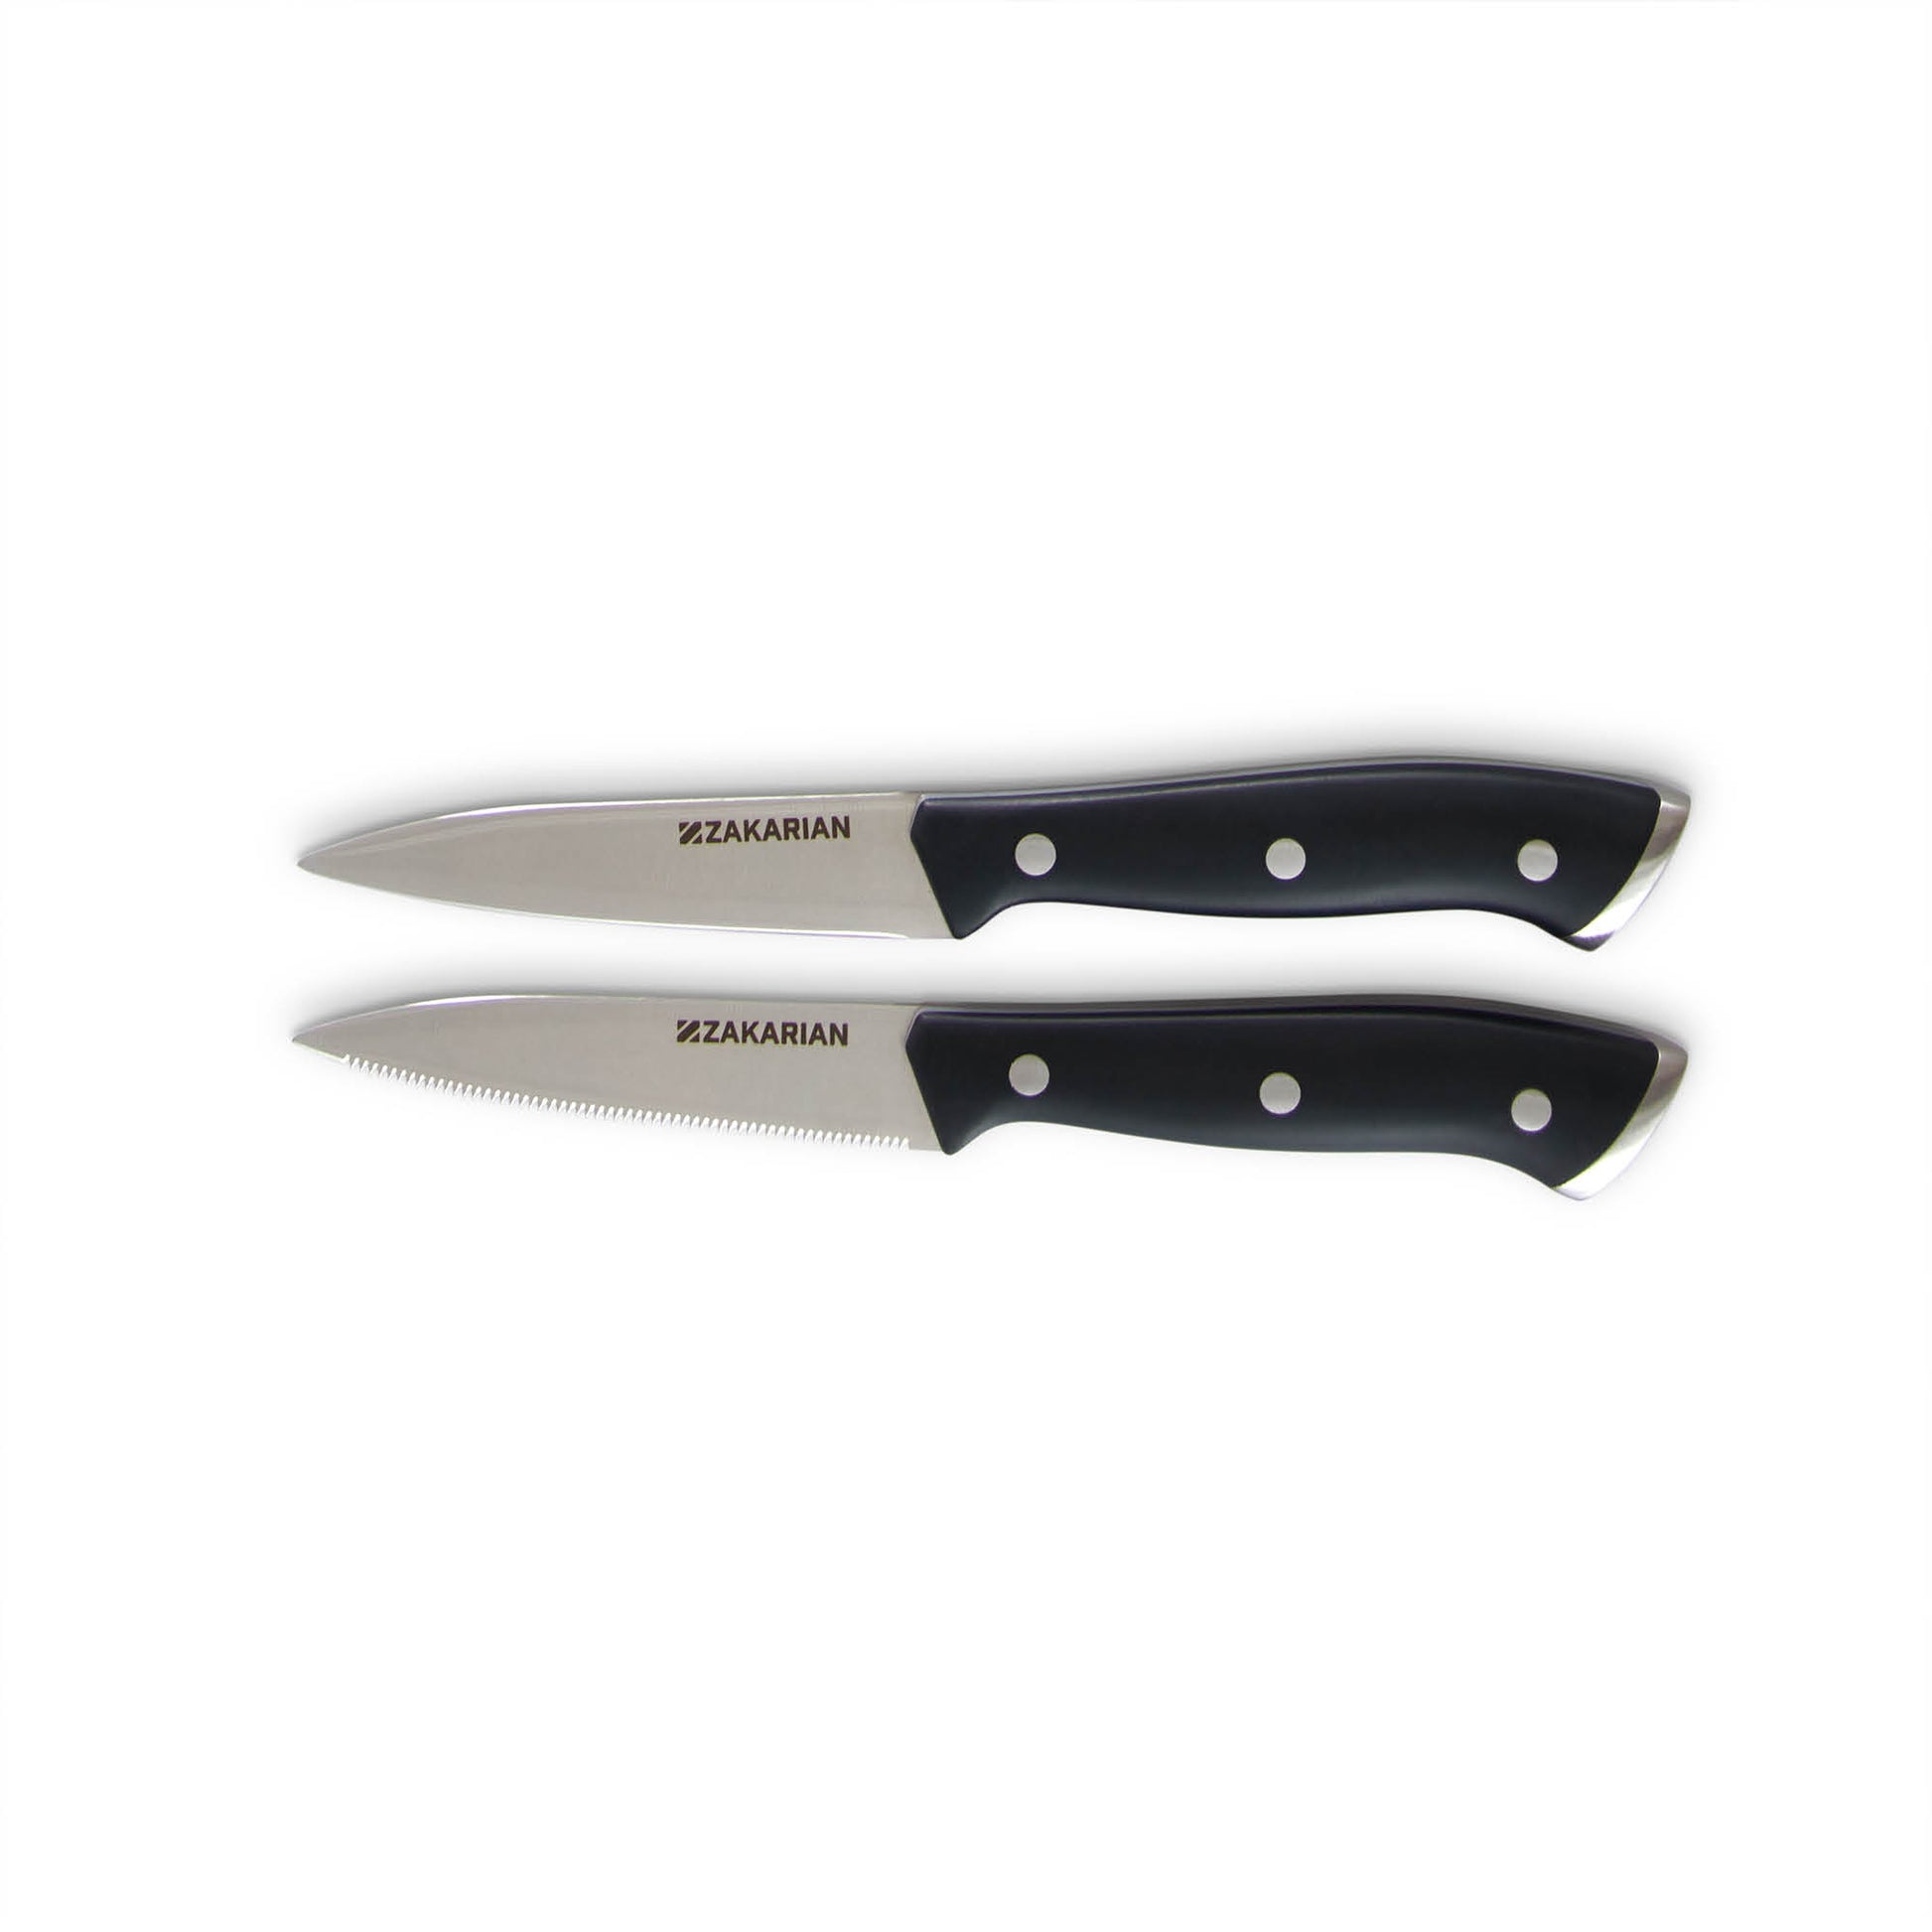  Farberware Stainless Steel Chef Knife Set, 3-Piece, Blue: Home  & Kitchen